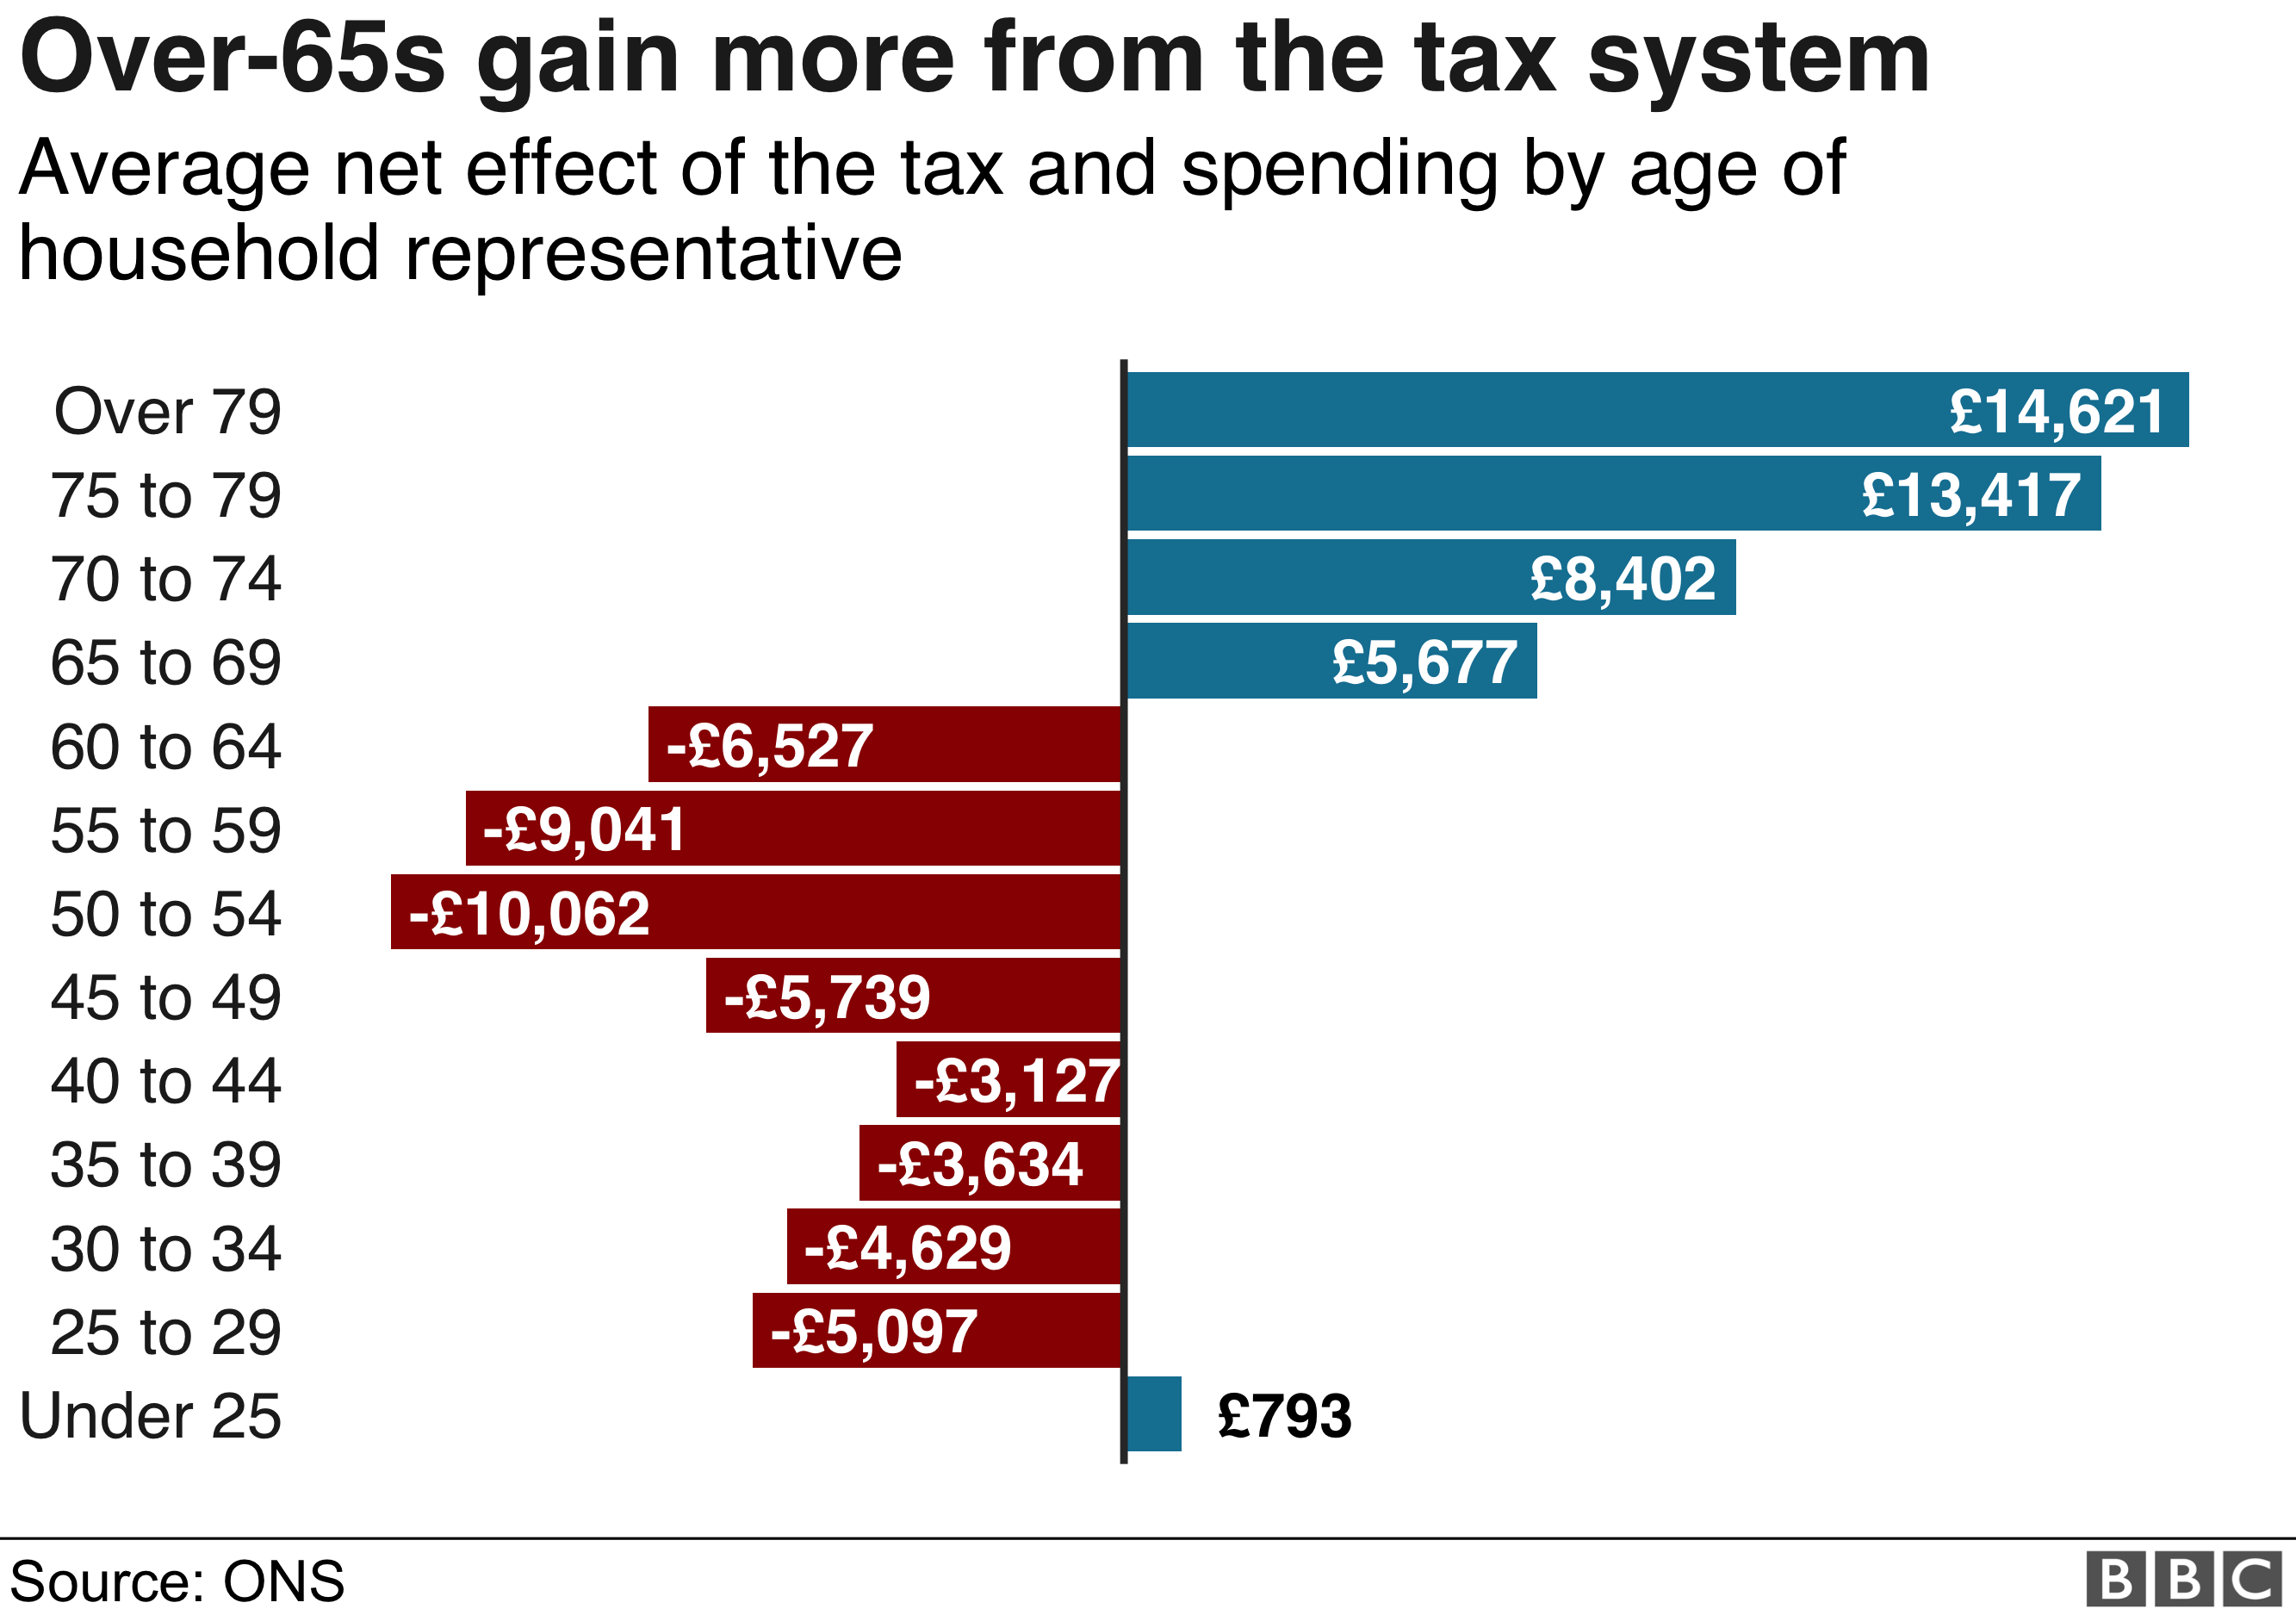 Chart showing how retired people gain more from the tax system